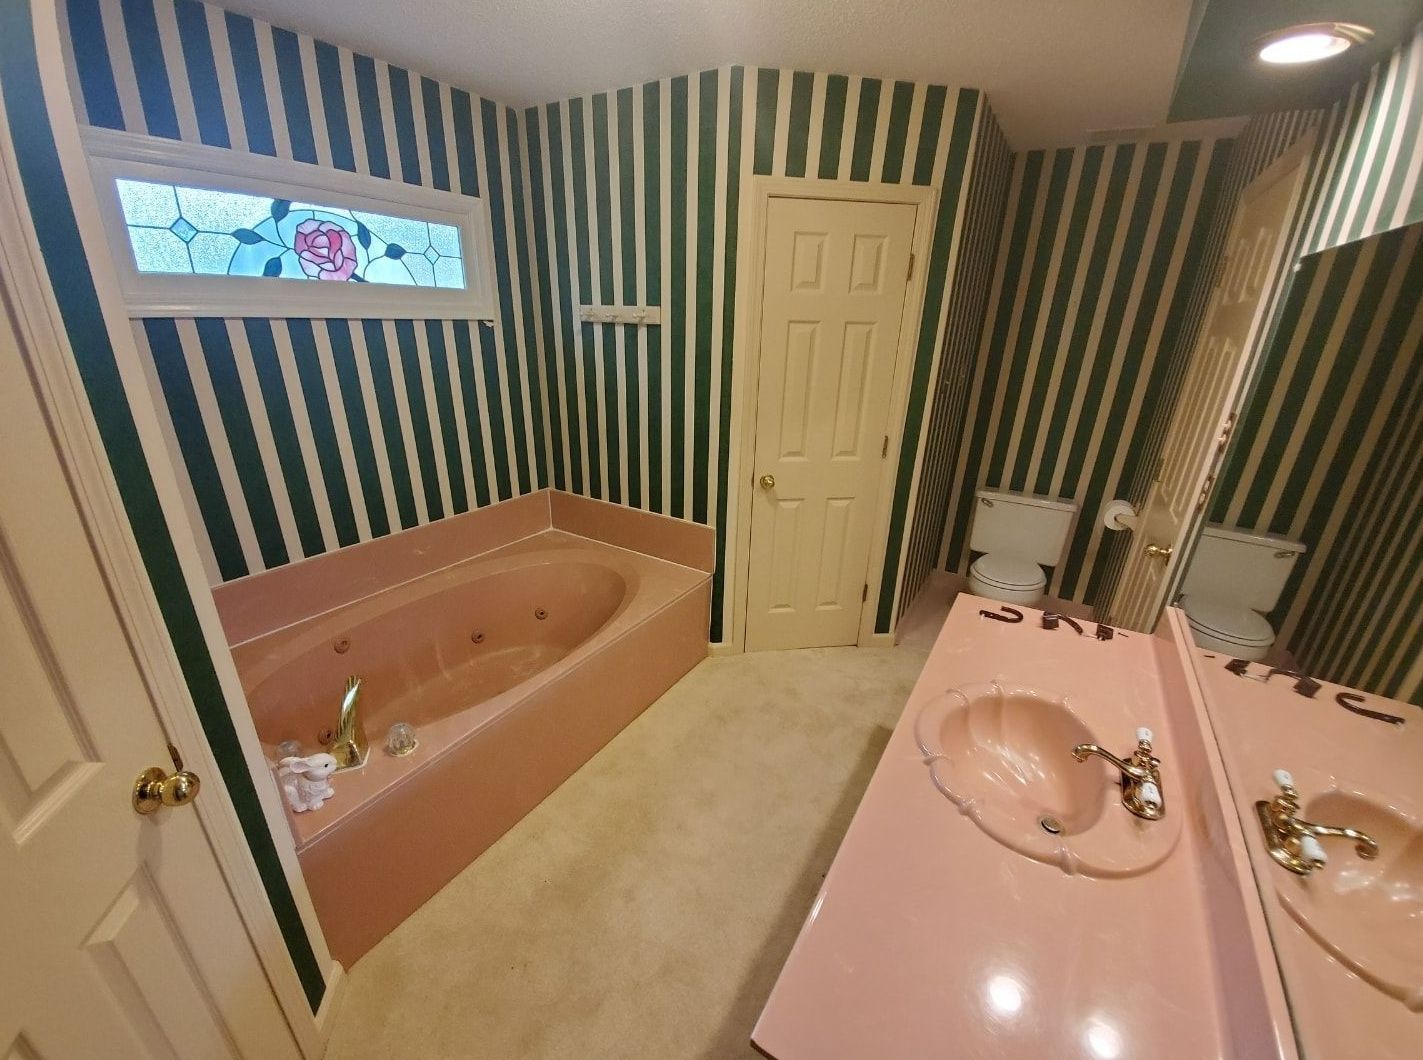 A bathroom with striped walls and a pink sink.